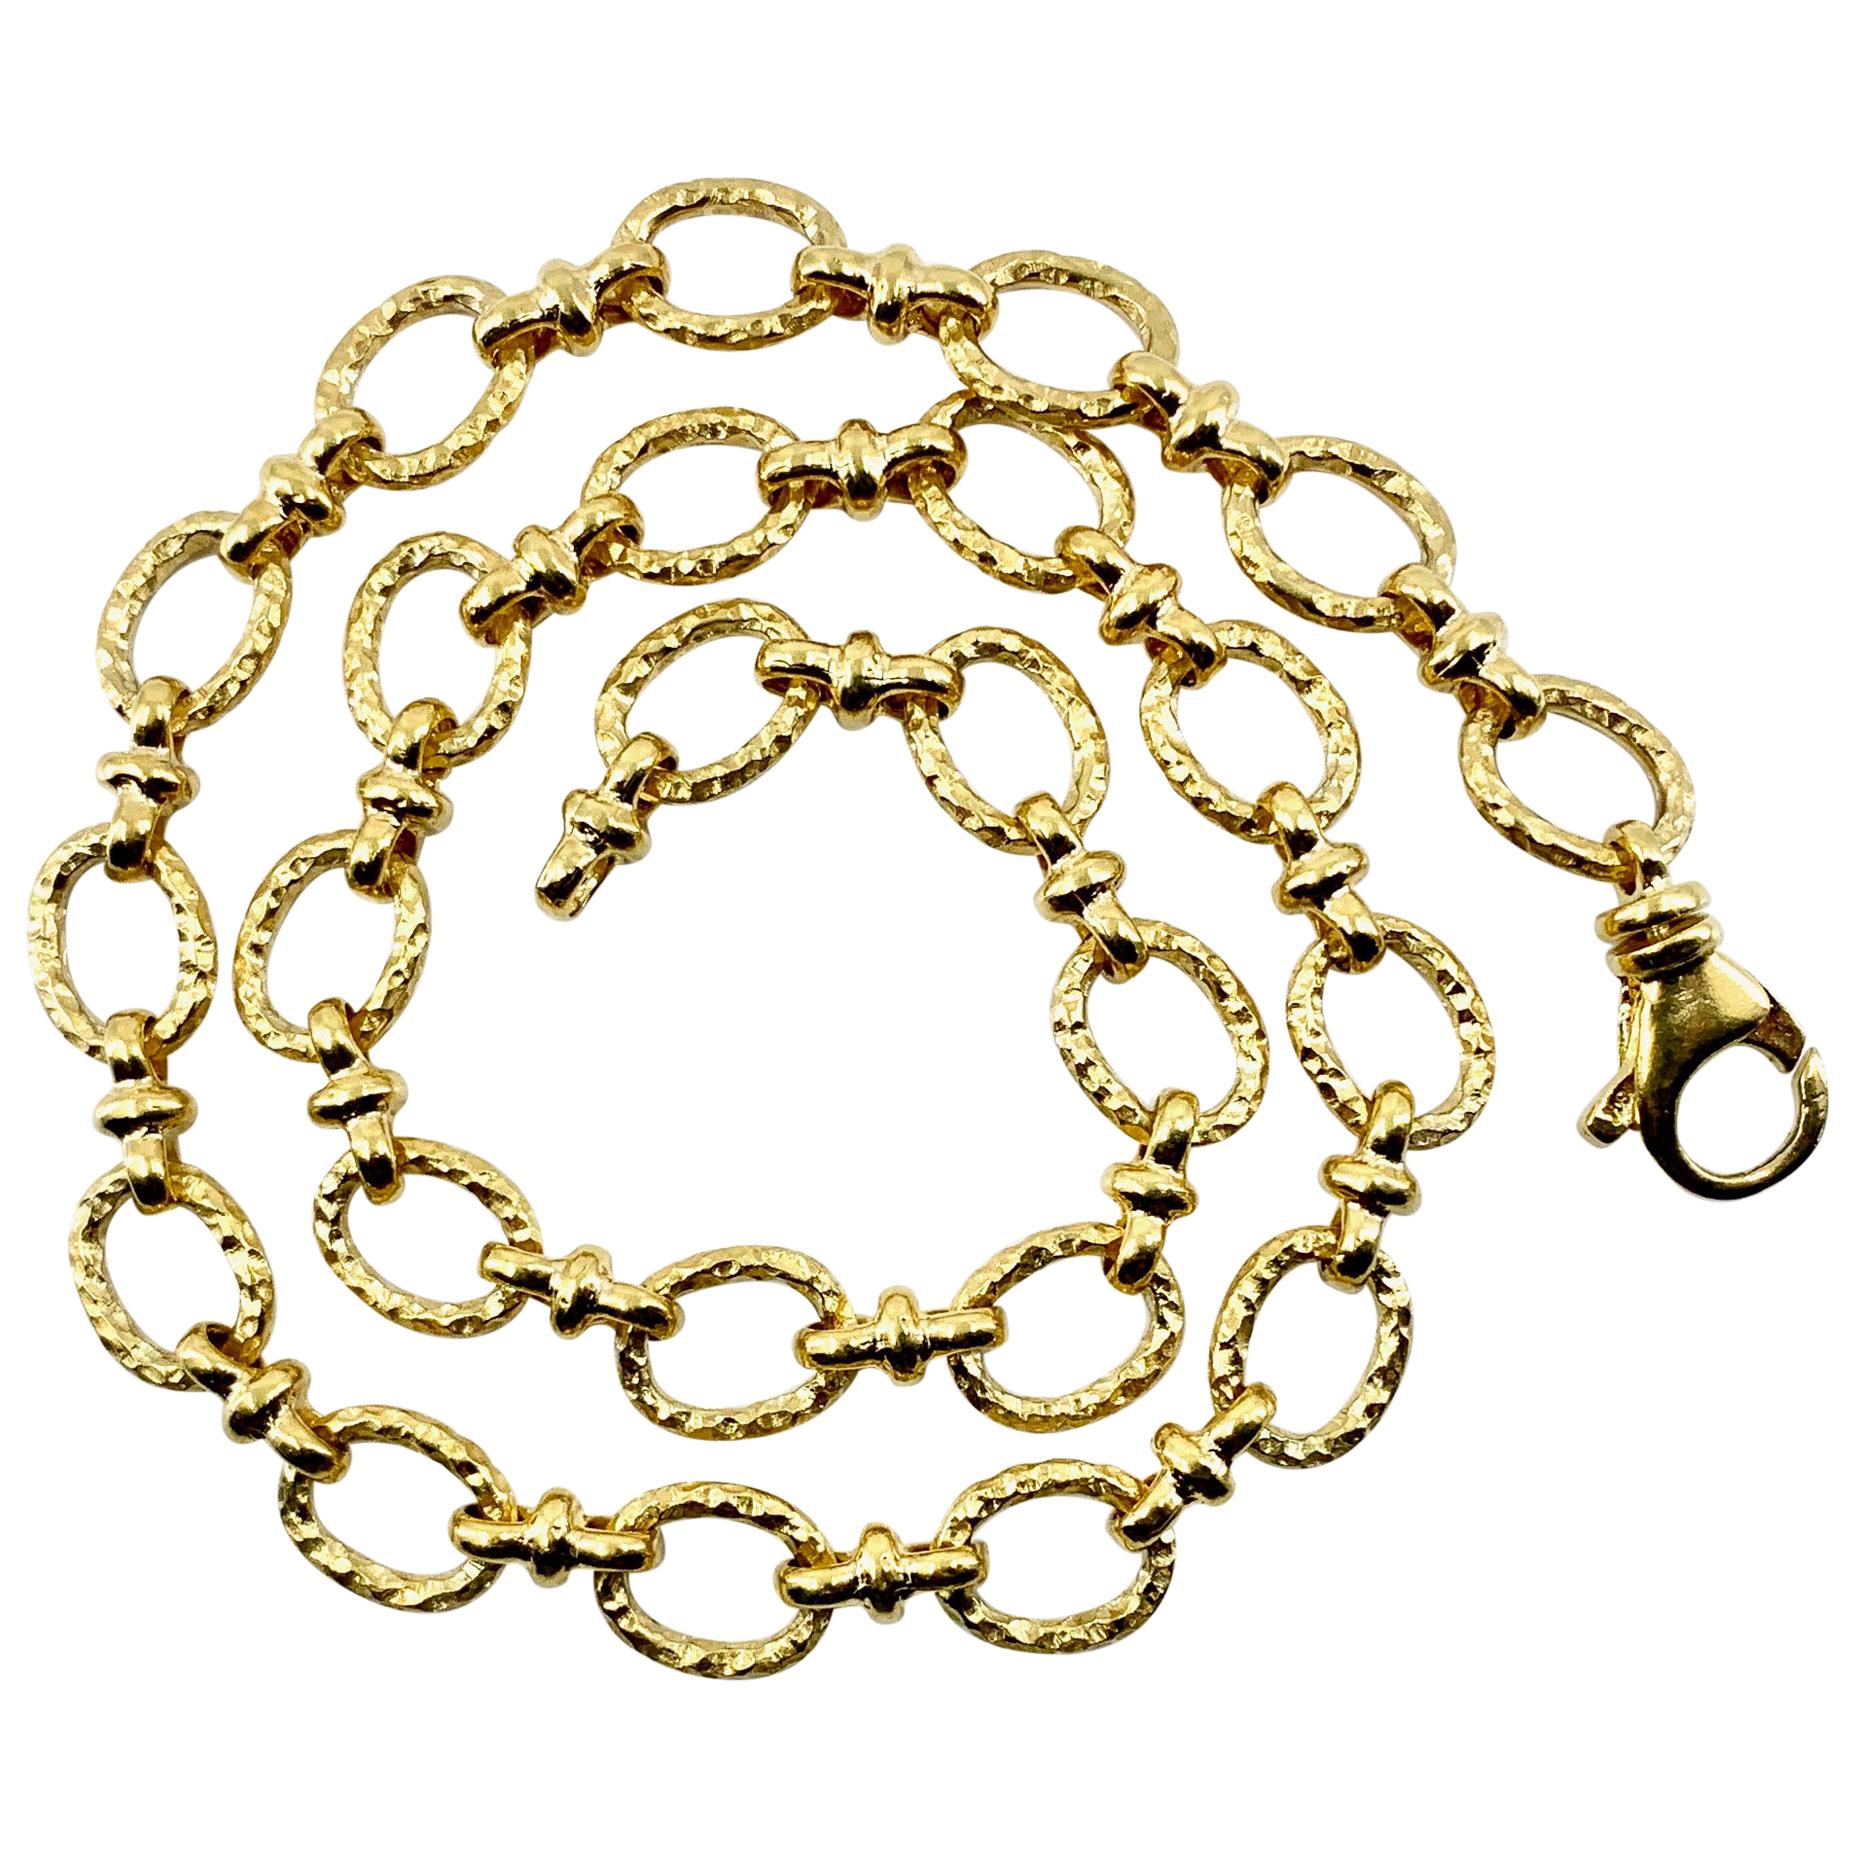 Ring and Connector Chain Choker in Hammered 18 Karat Yellow Gold